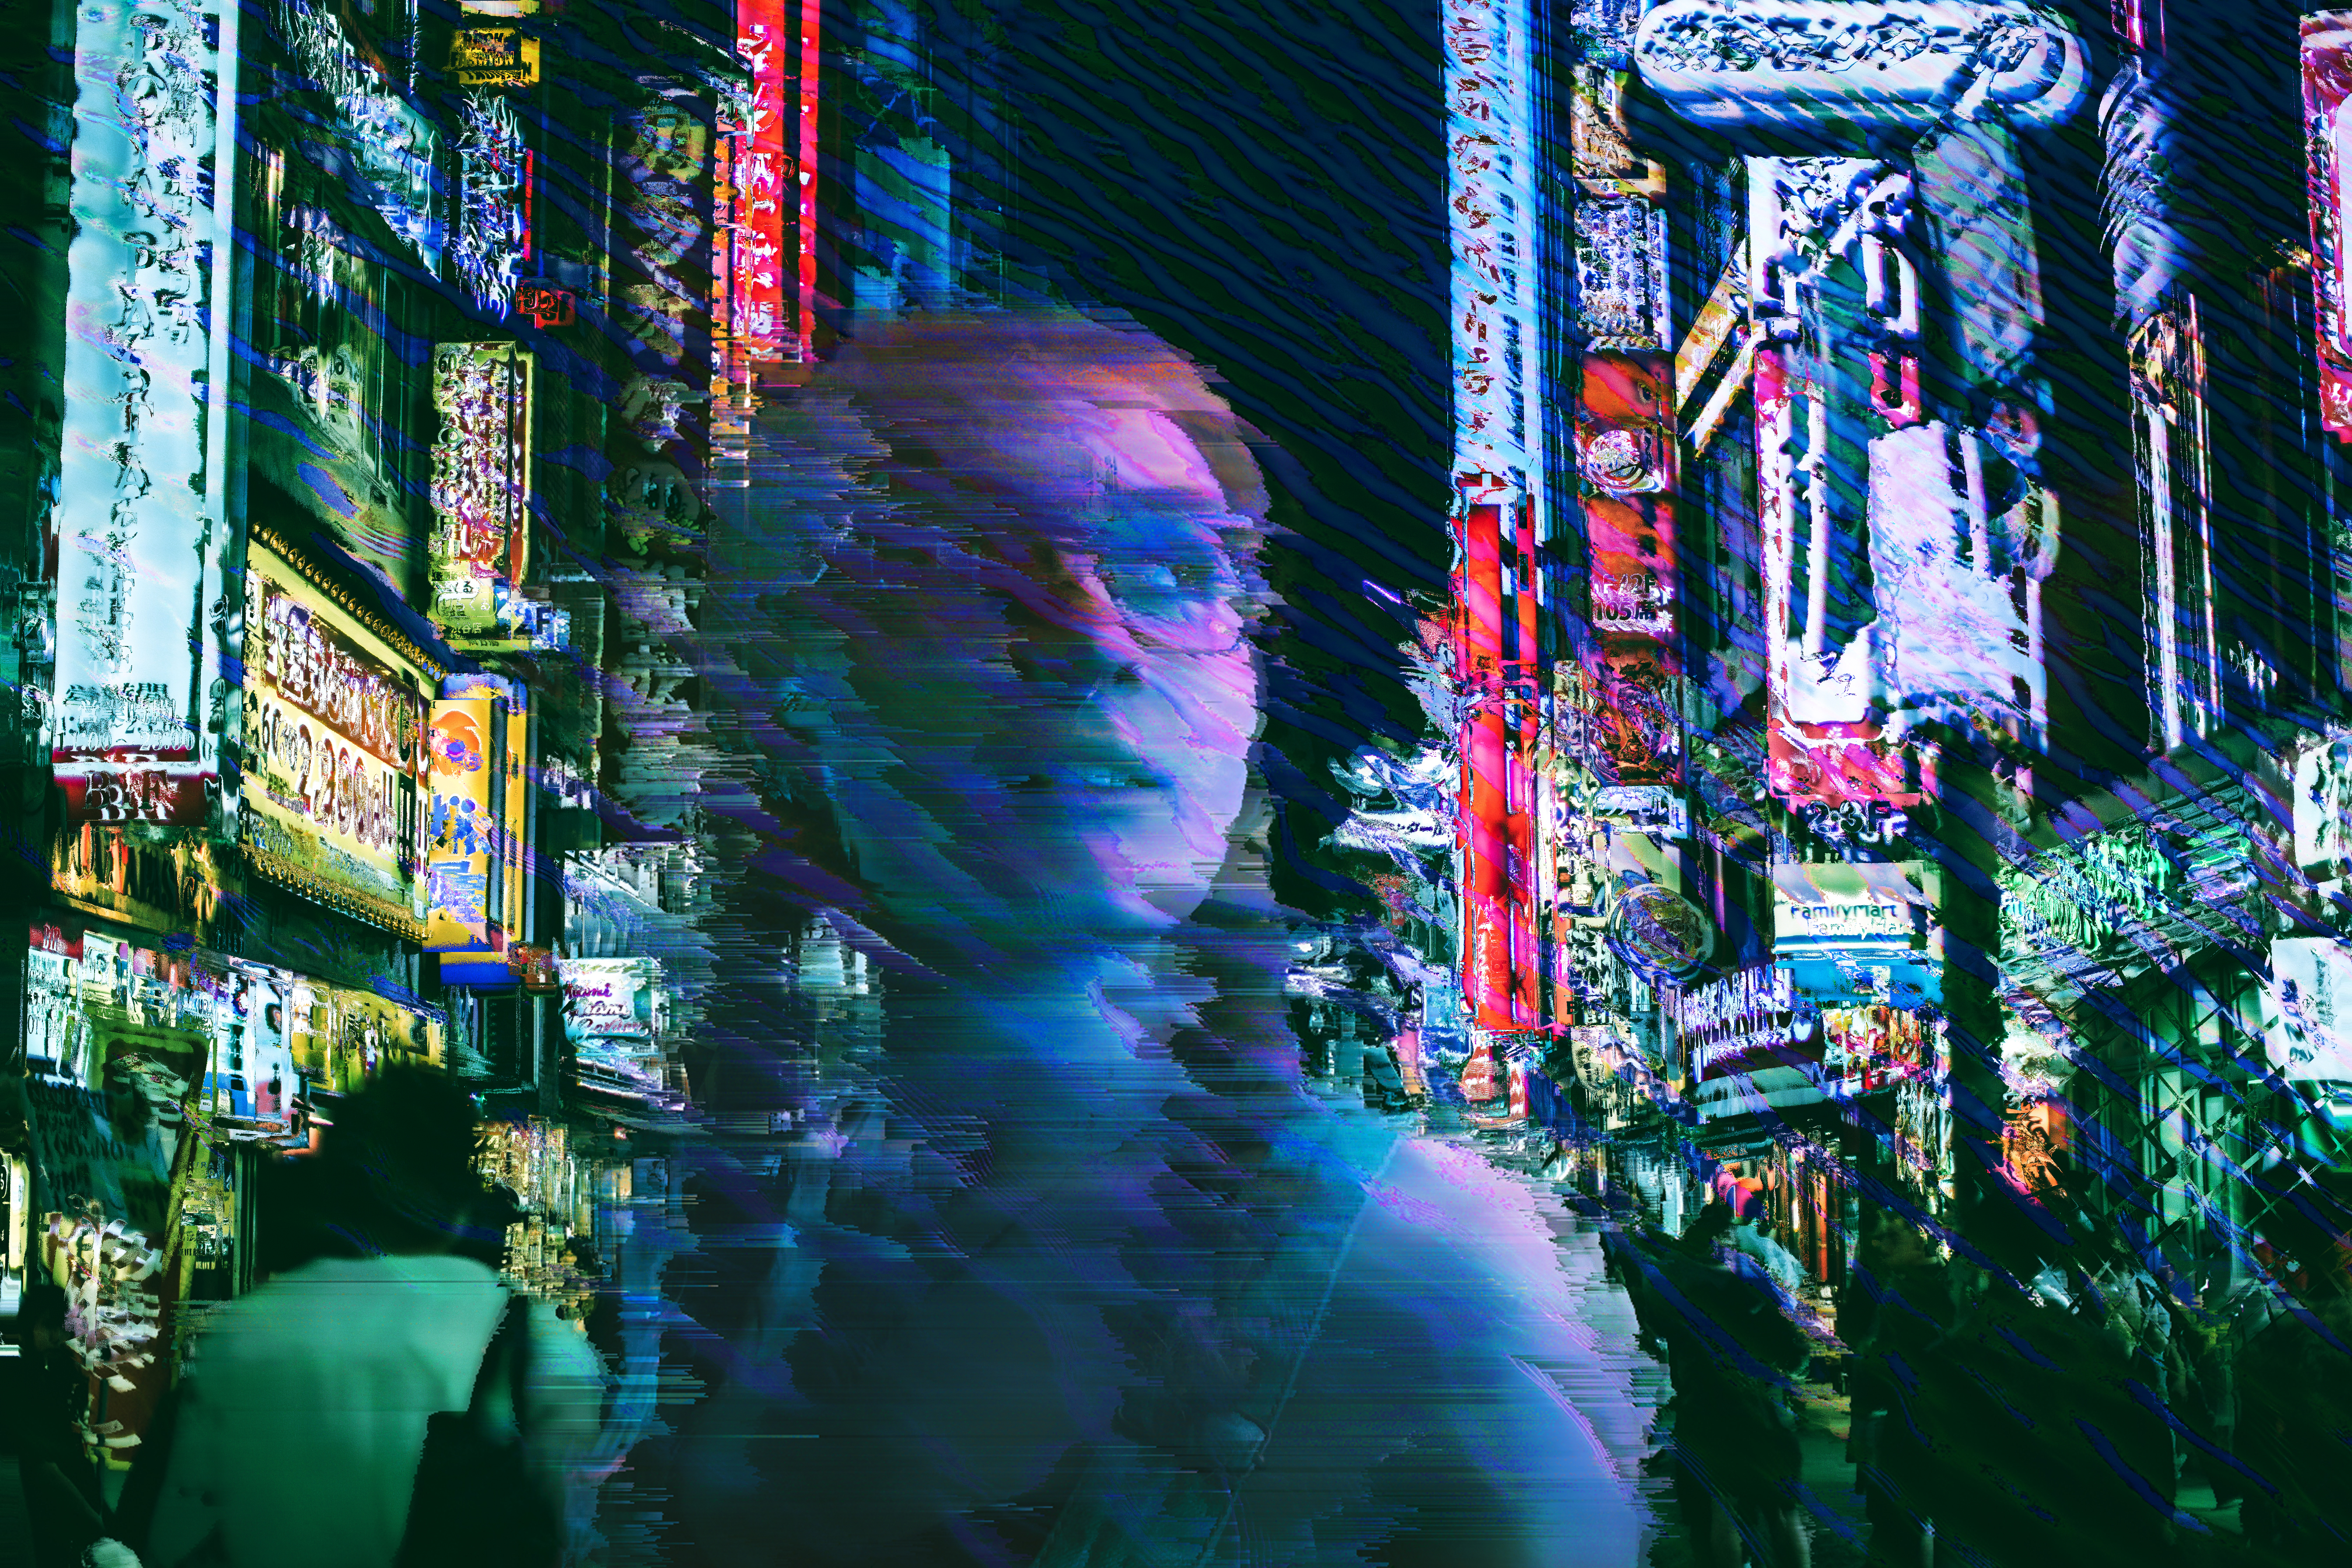 Tokyo Lights 2. Glitched blended composite: Exclusion / difference ripples; Displacement map; 2 seperate pixel-sorts. Tokyo street Photo by Andre Benz on Unsplash; Girl Photo by Shwa Hall; Displacement map is ocean waves, Photo by Oscar Keys; Difference/exclusion filter with water ripples Photo by Shwa Hall; (c)2017 Patrick Chase. All Rights Reserved